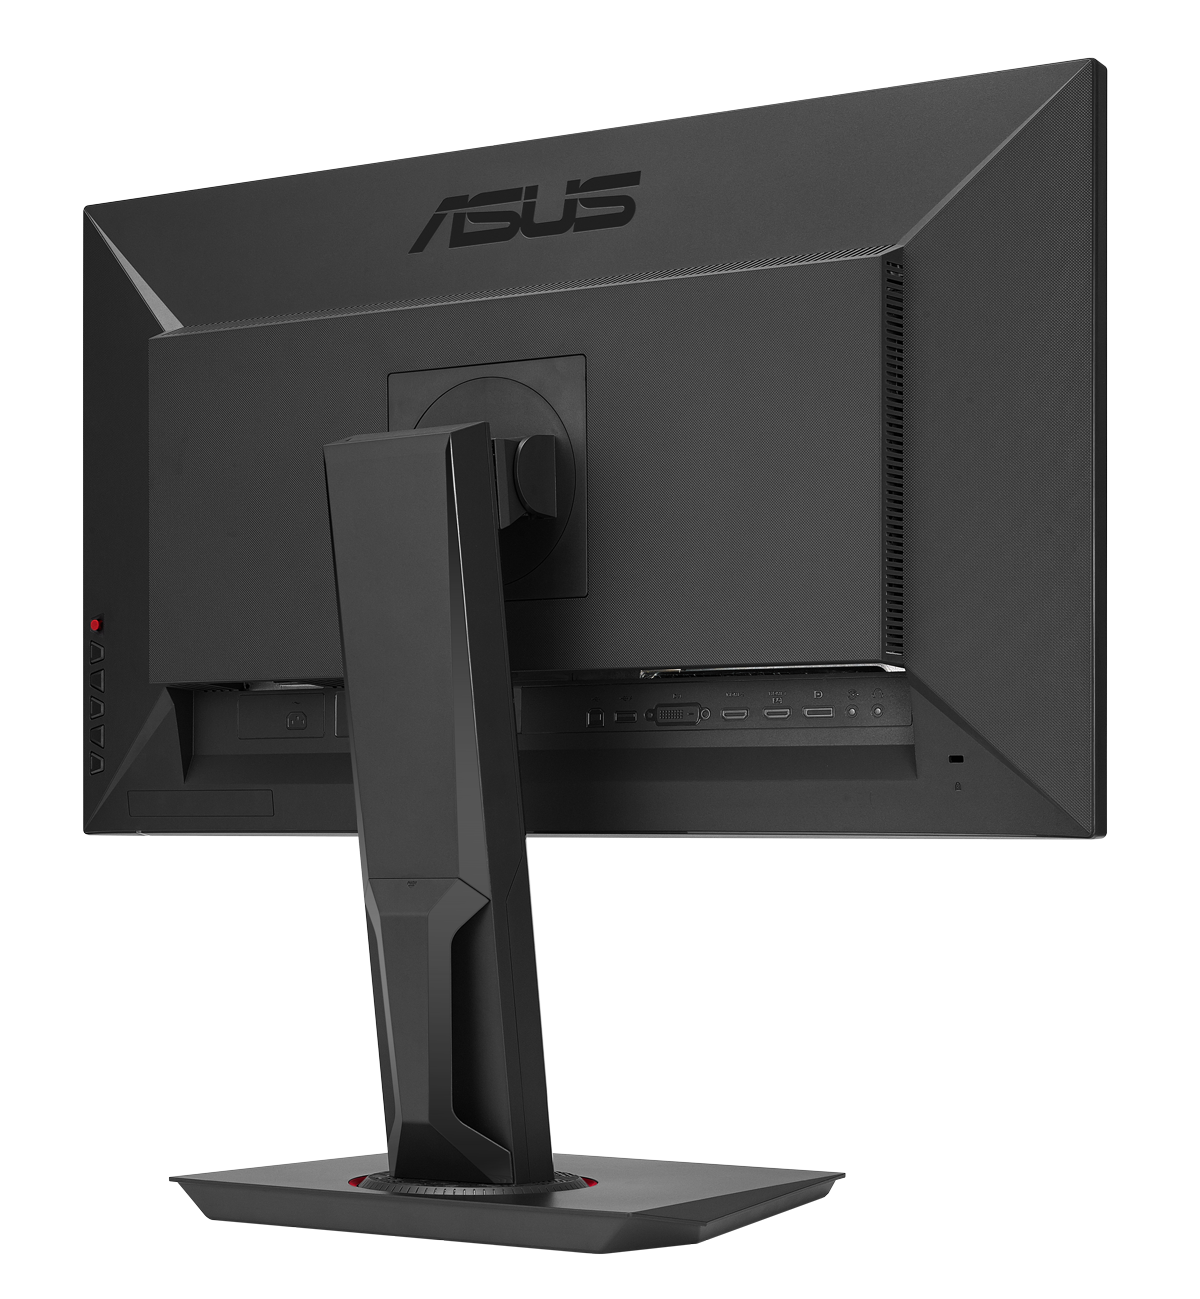 Media asset in full size related to 3dfxzone.it news item entitled as follows: ASUS annuncia il gaming monitor WQHD MG278Q - FreeSync Ready | Image Name: news22972_ASUS-MG278Q_2.png